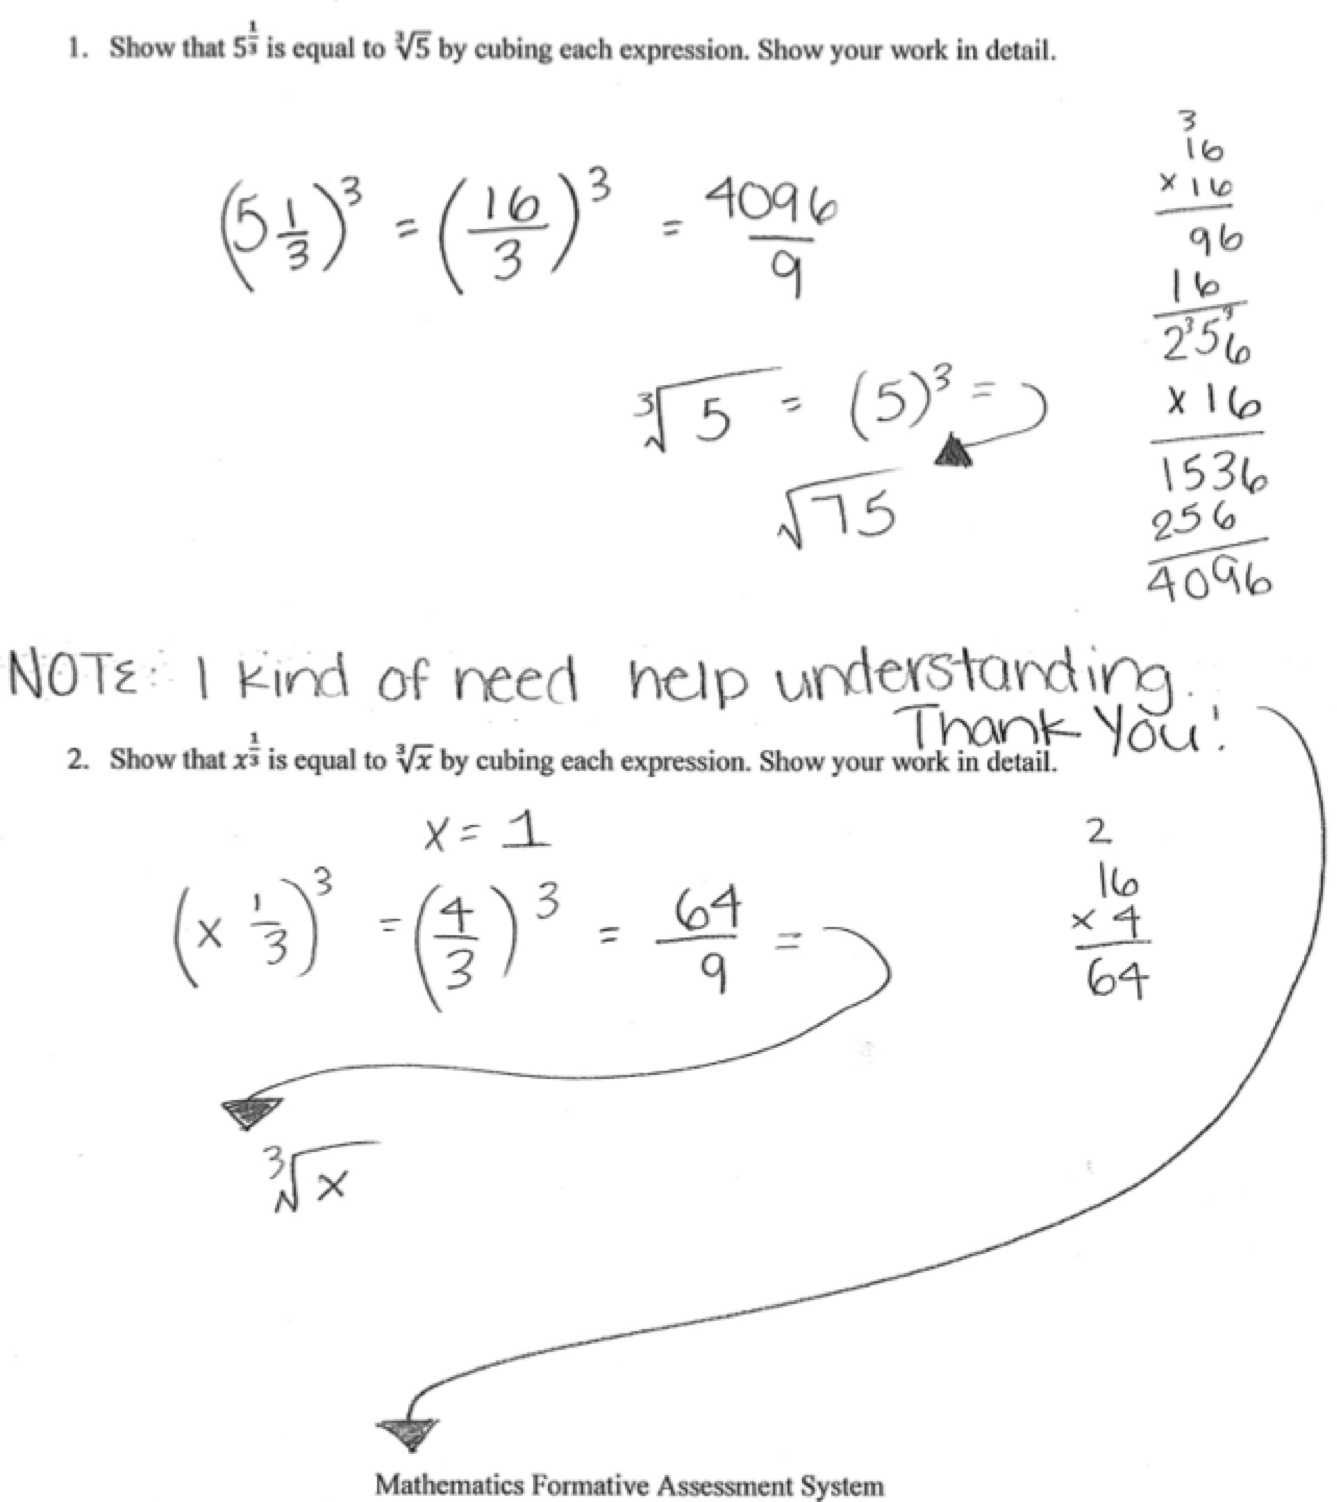 Rational Expressions Worksheet Algebra 2 Also Simplifying Expressions with Rational Exponents Worksheet the Best